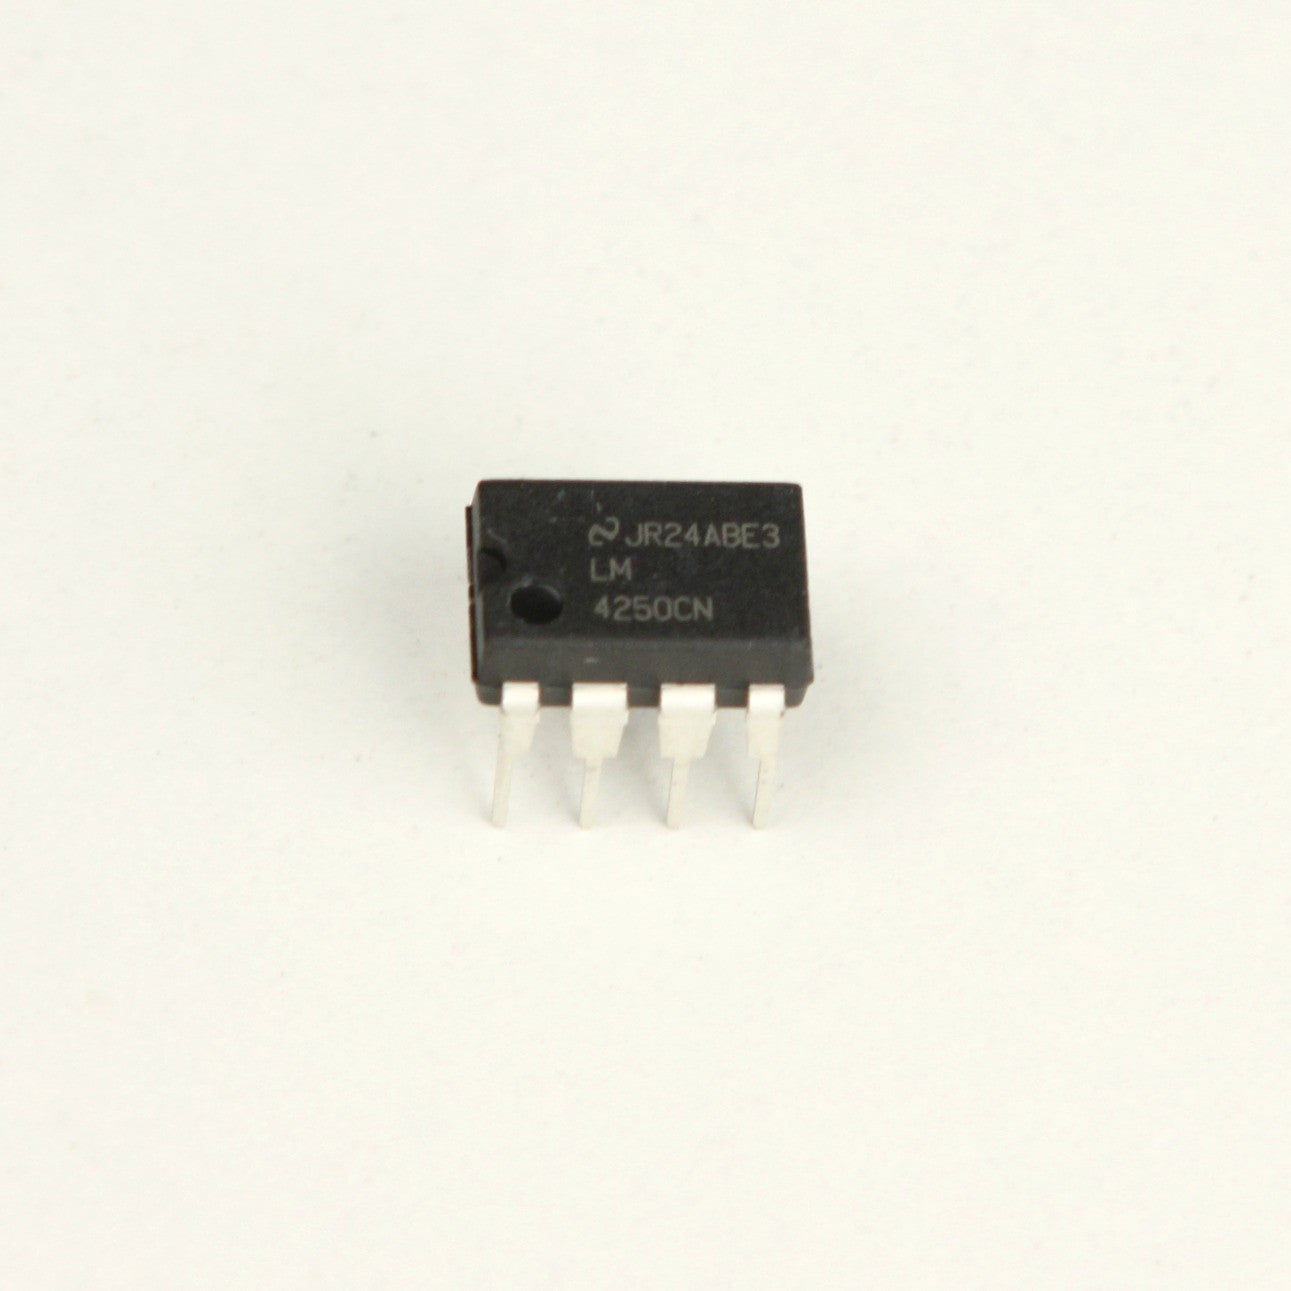 Electronics -  Preamp IC Chip - USA L-series and ASAT Bass